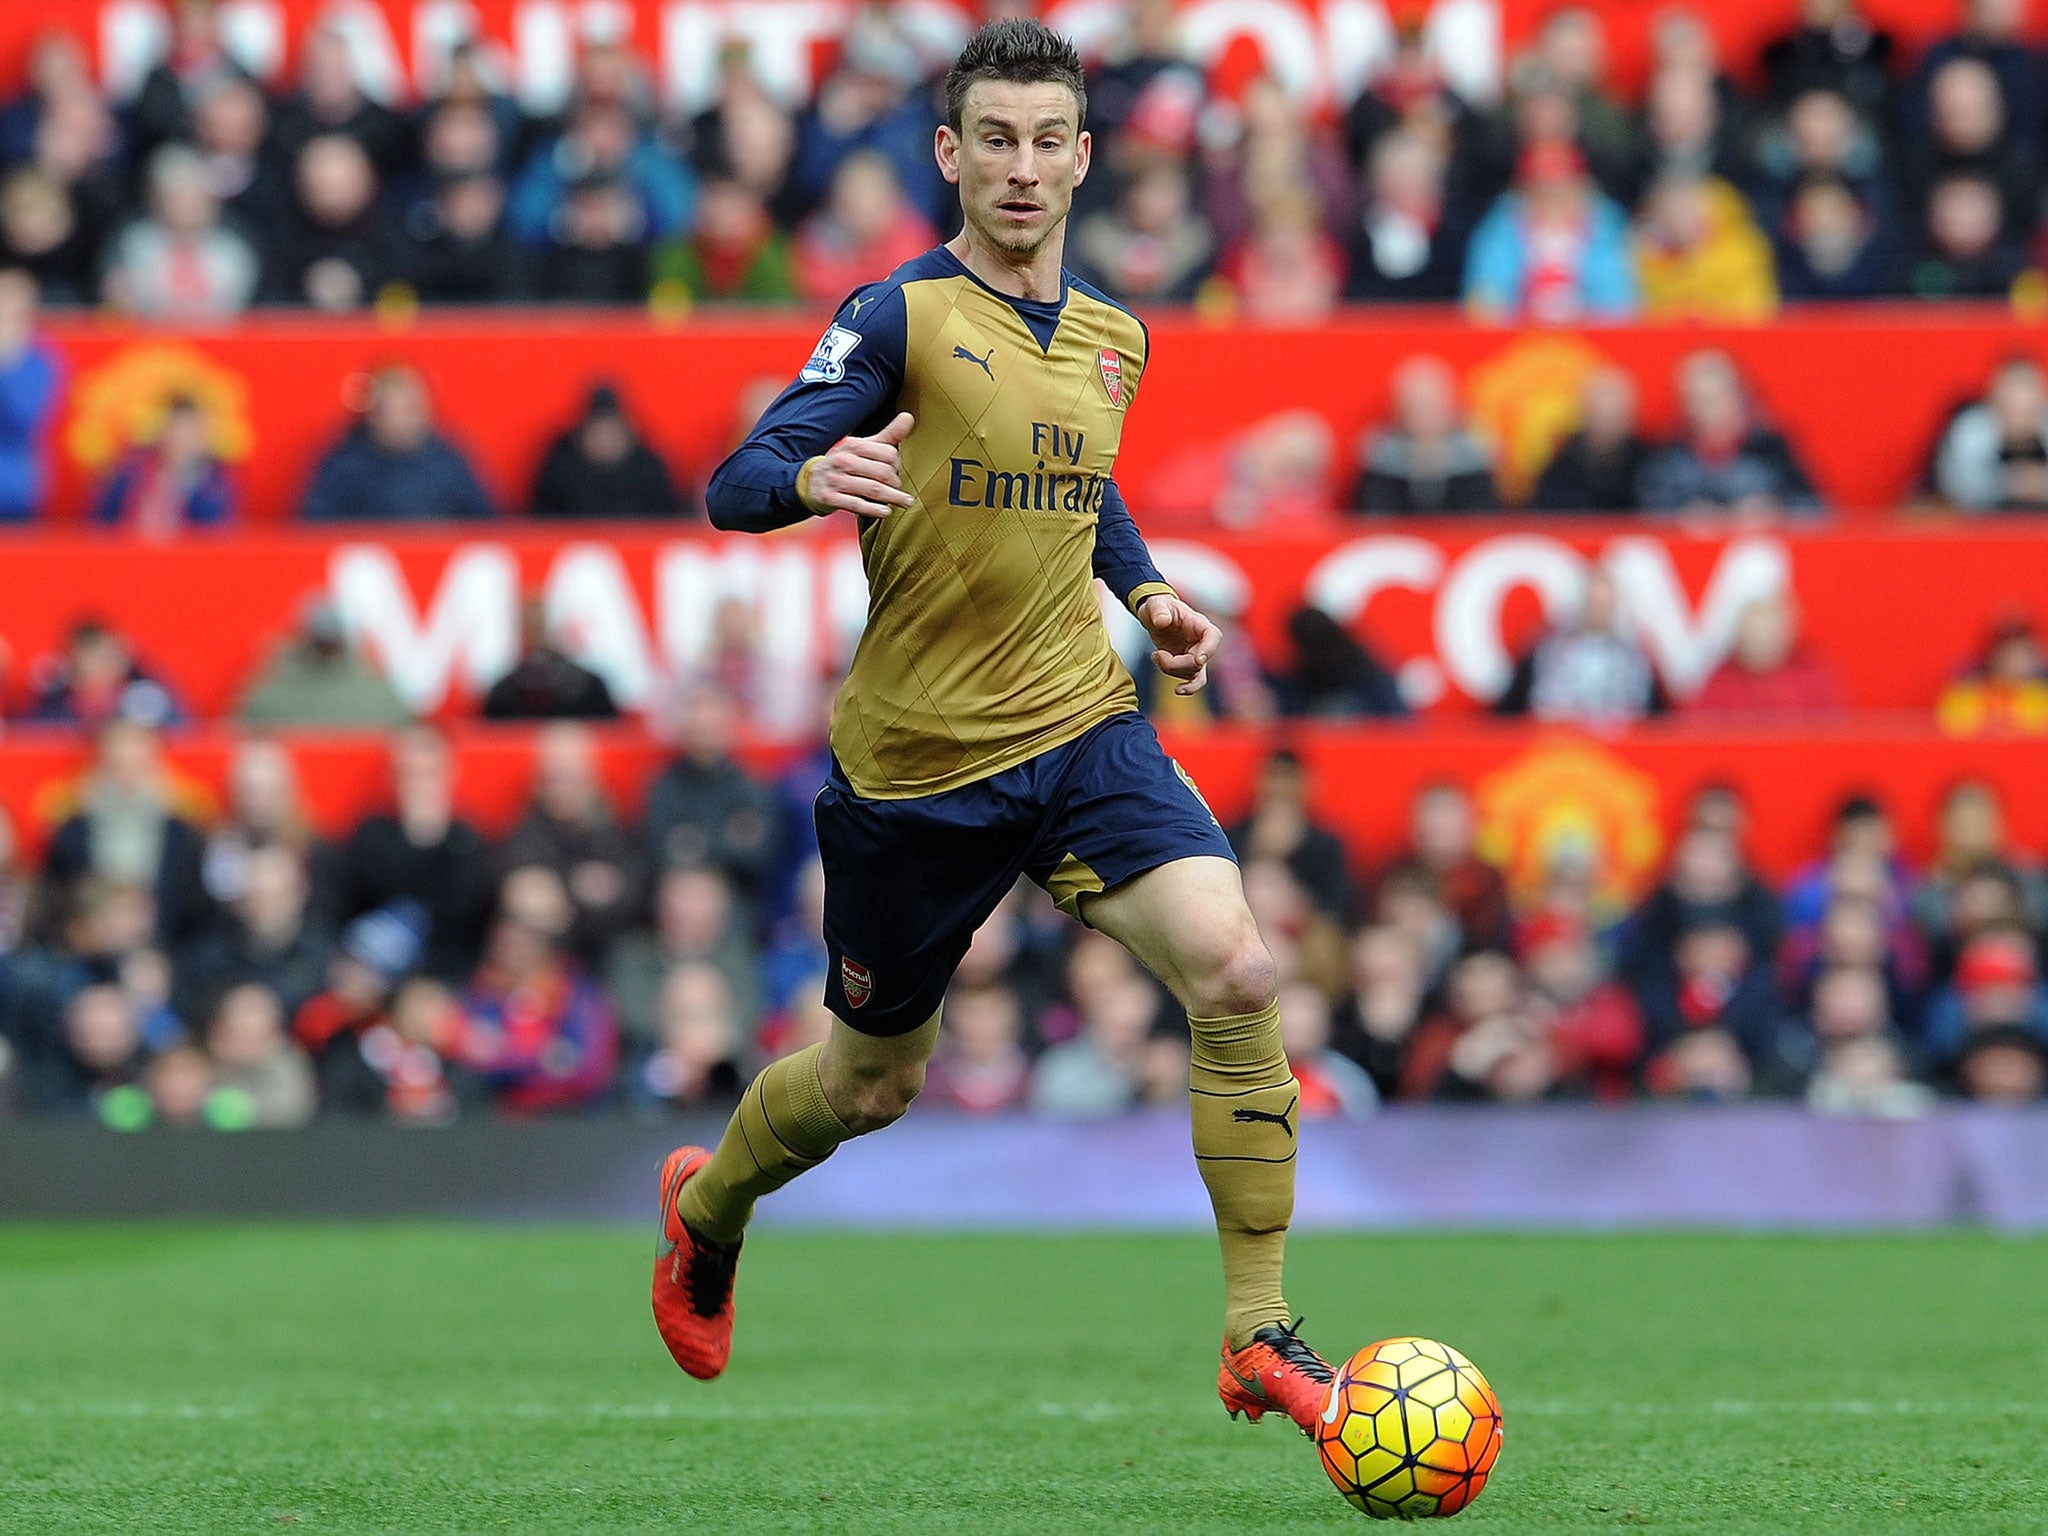 Arsenal defender Laurent Koscielny will miss the FA Cup trip to Hull City